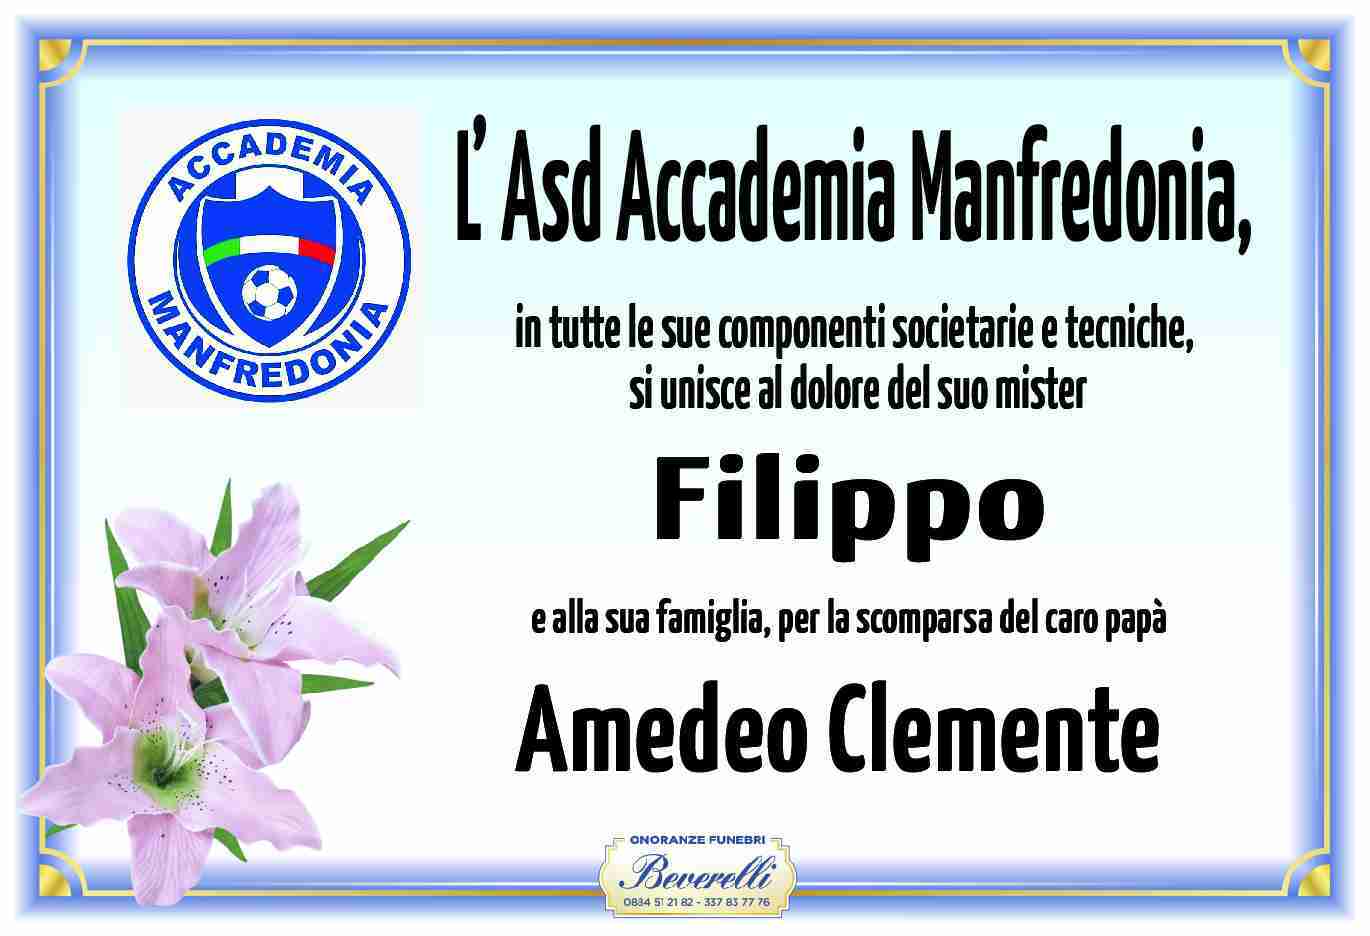 Amedeo Clemente